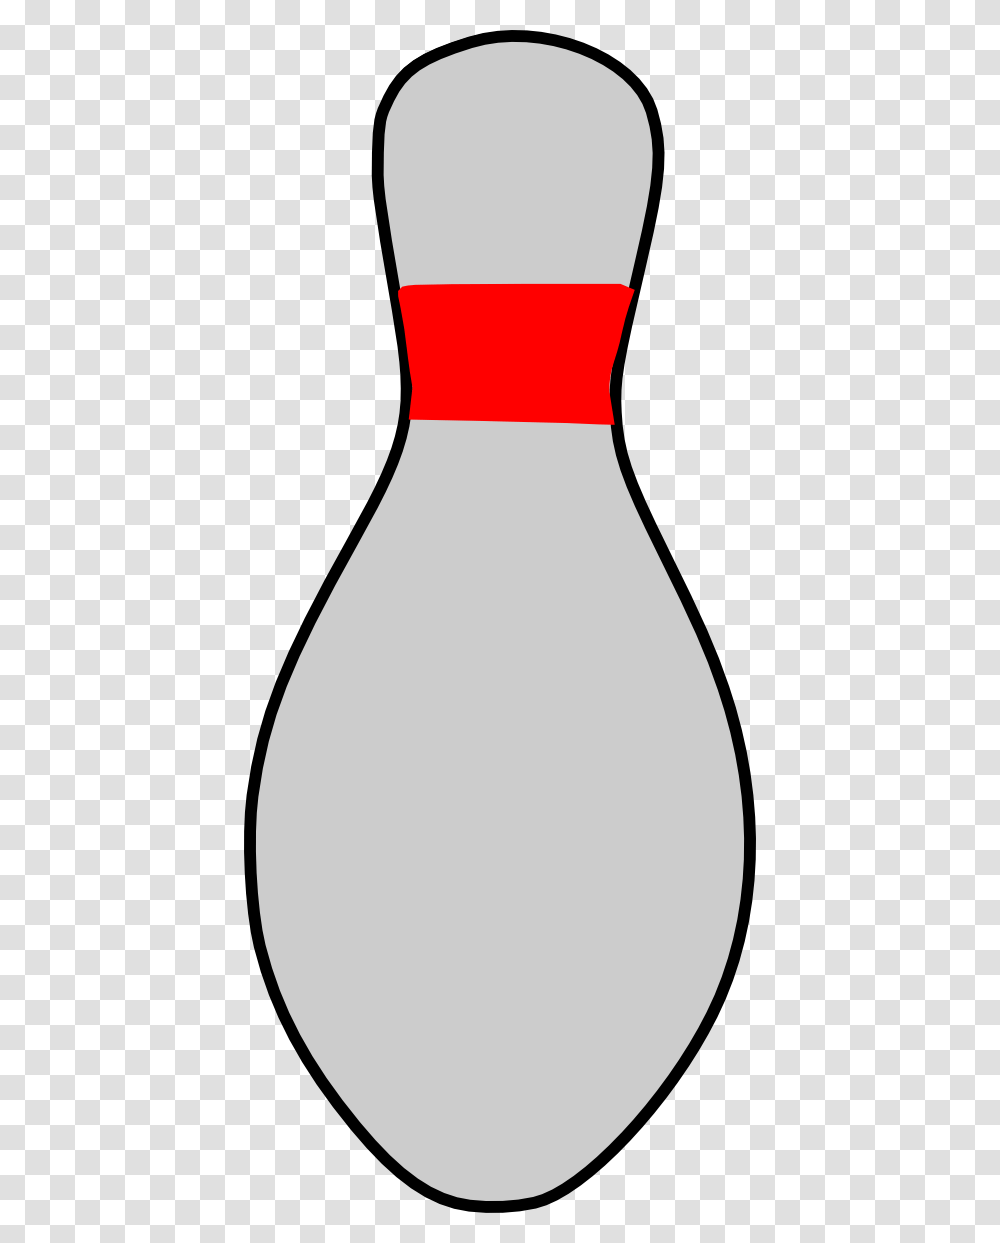 Pictures Of Bowling Pins And Balls, Beverage, Drink, Alcohol, Bottle Transparent Png